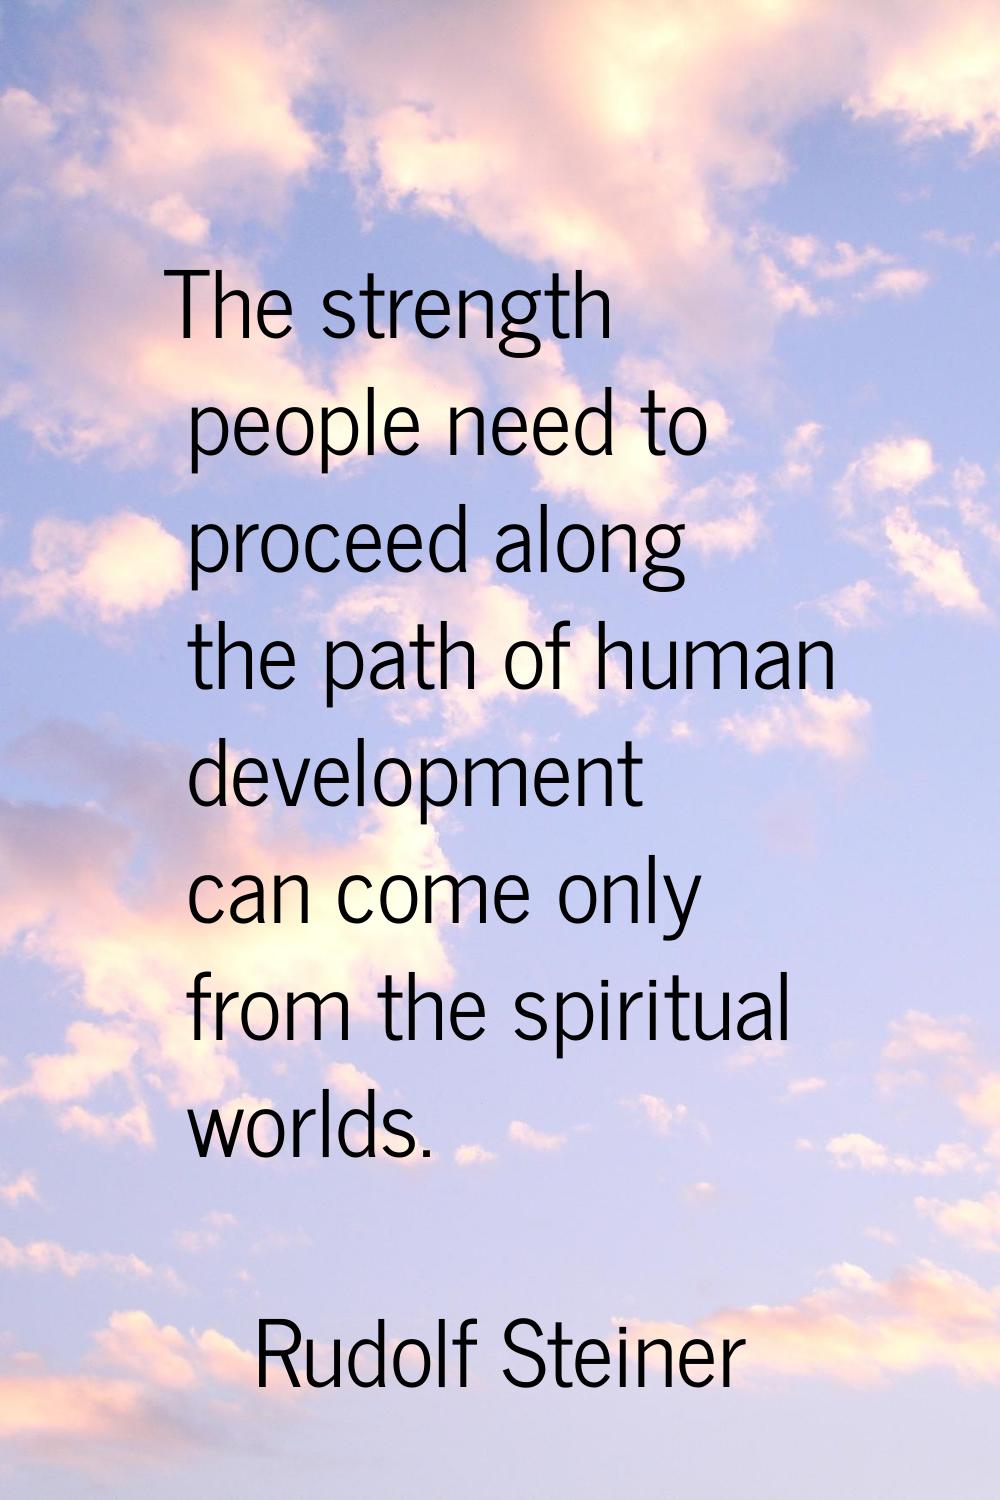 The strength people need to proceed along the path of human development can come only from the spir